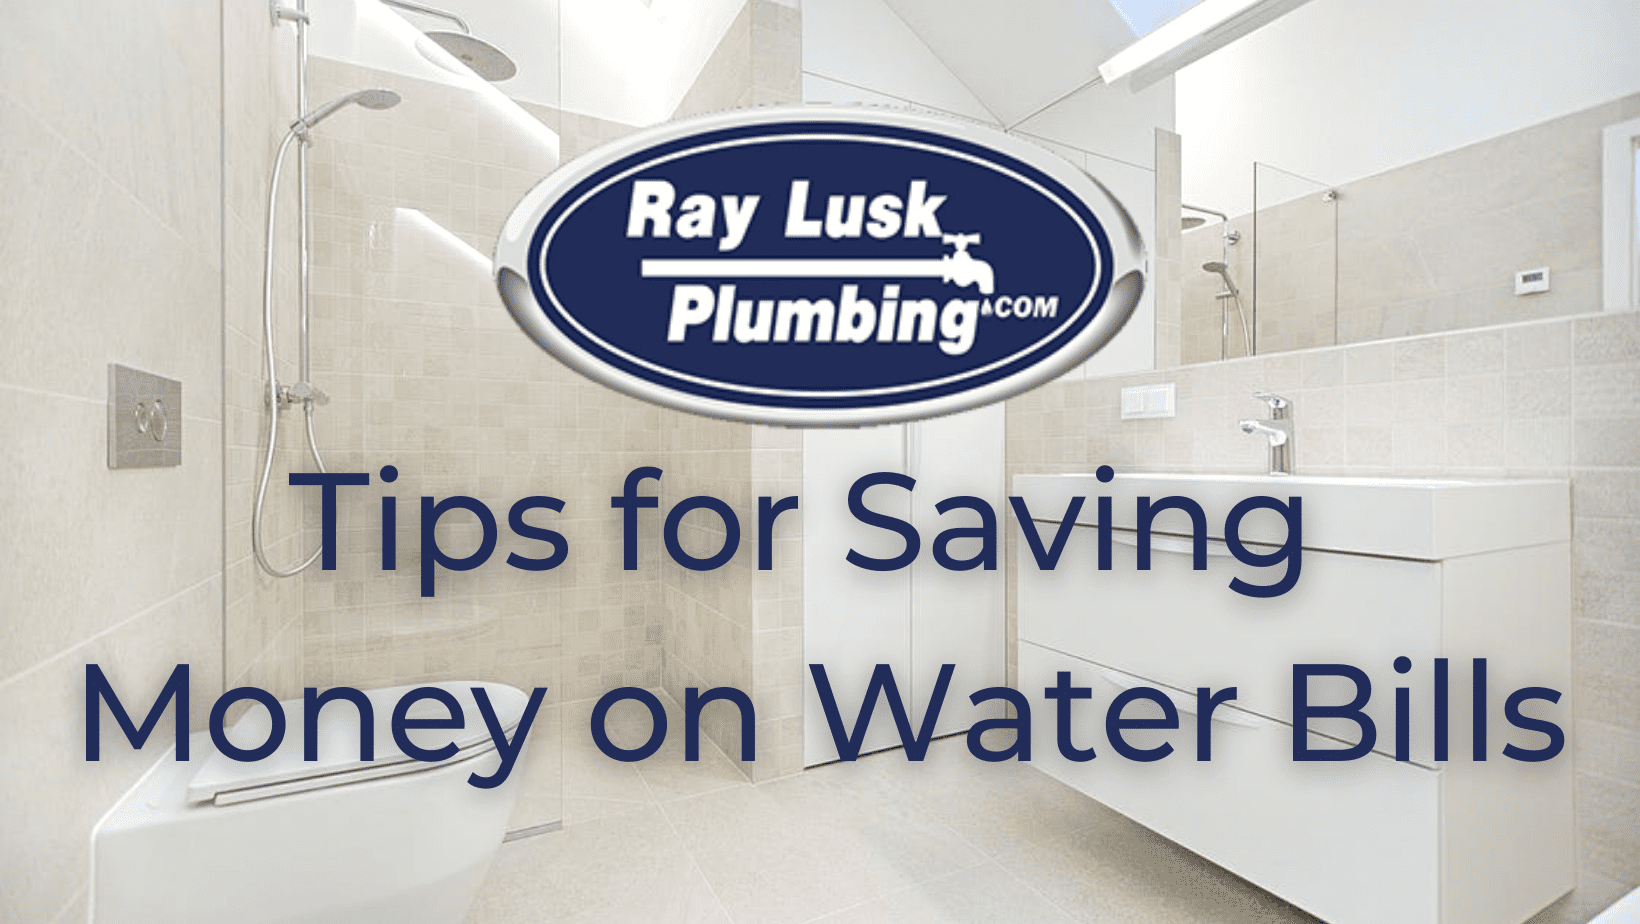 Image text reads: Tips for Saving Money on Water Bills